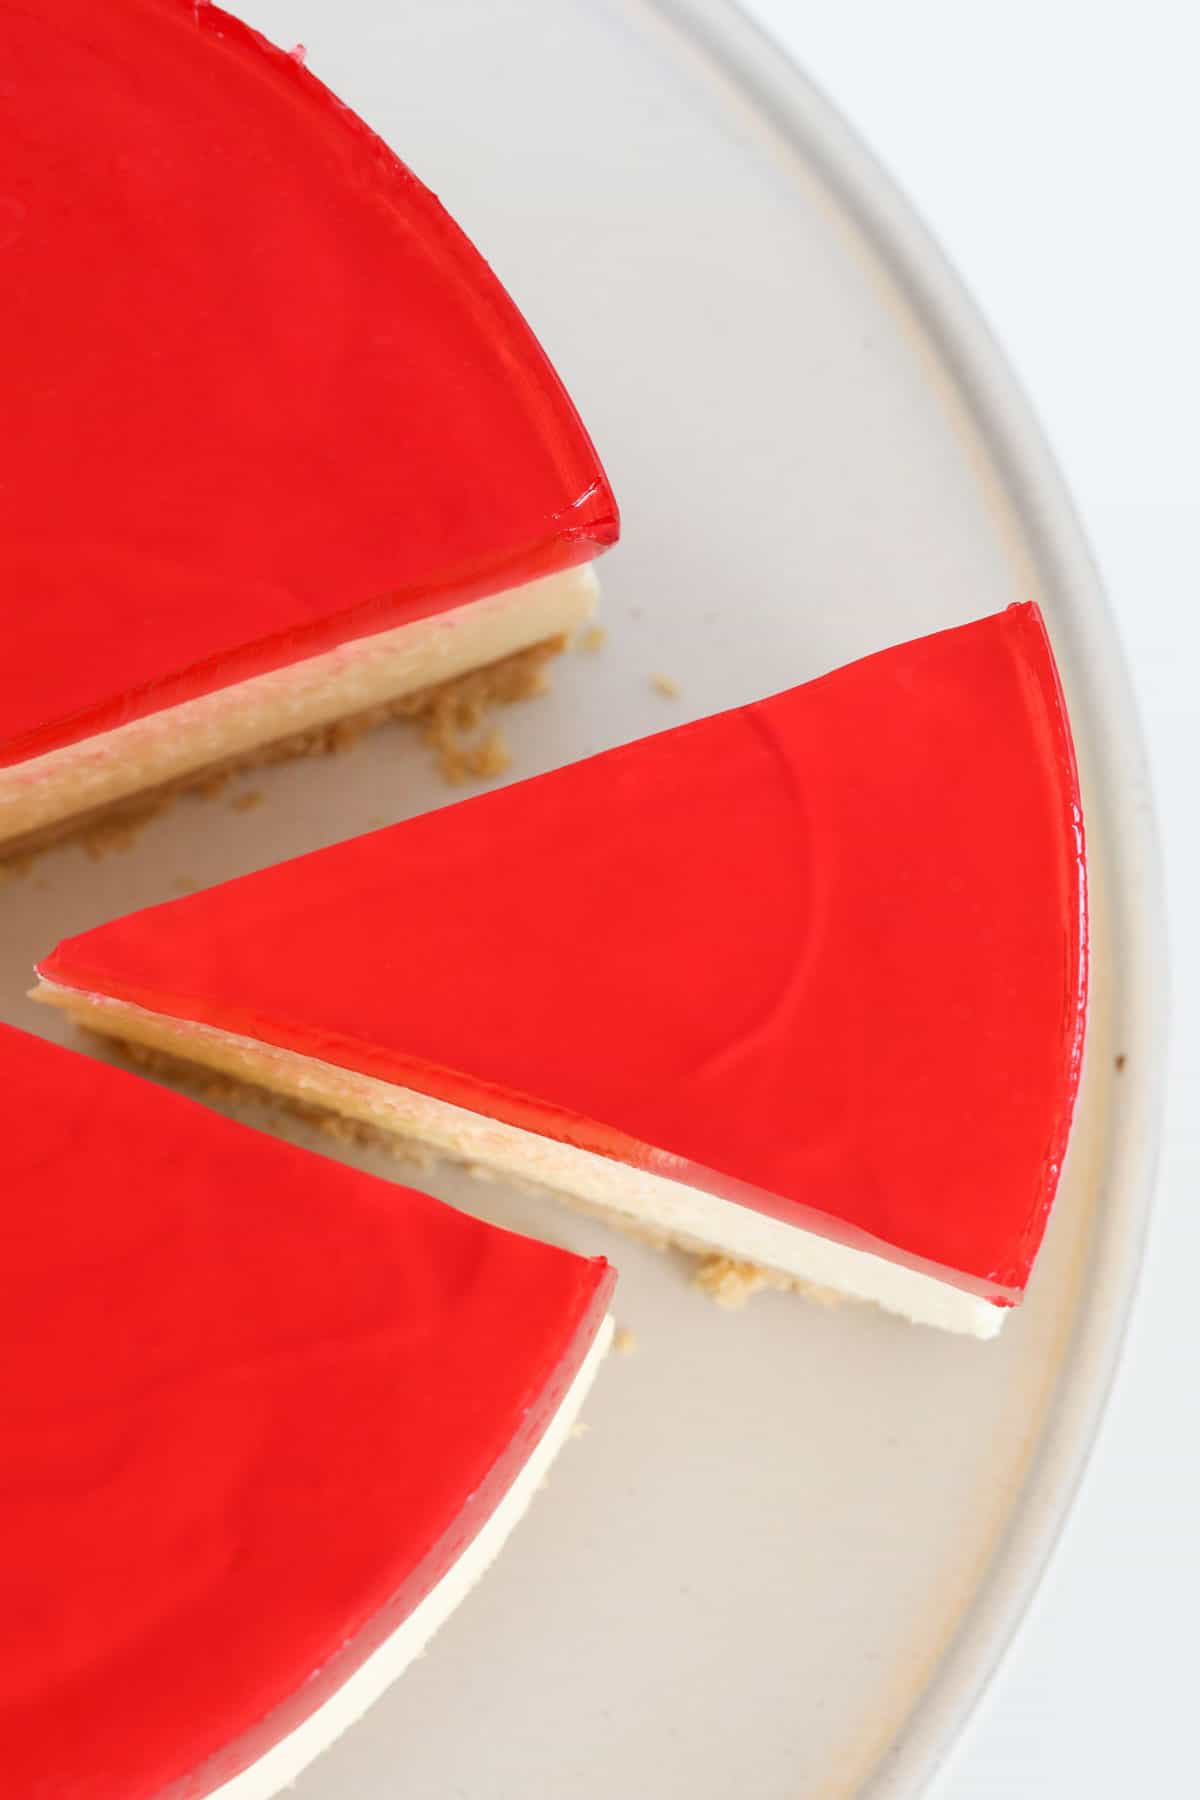 An overhead shot of a red jelly topped cheesecake.